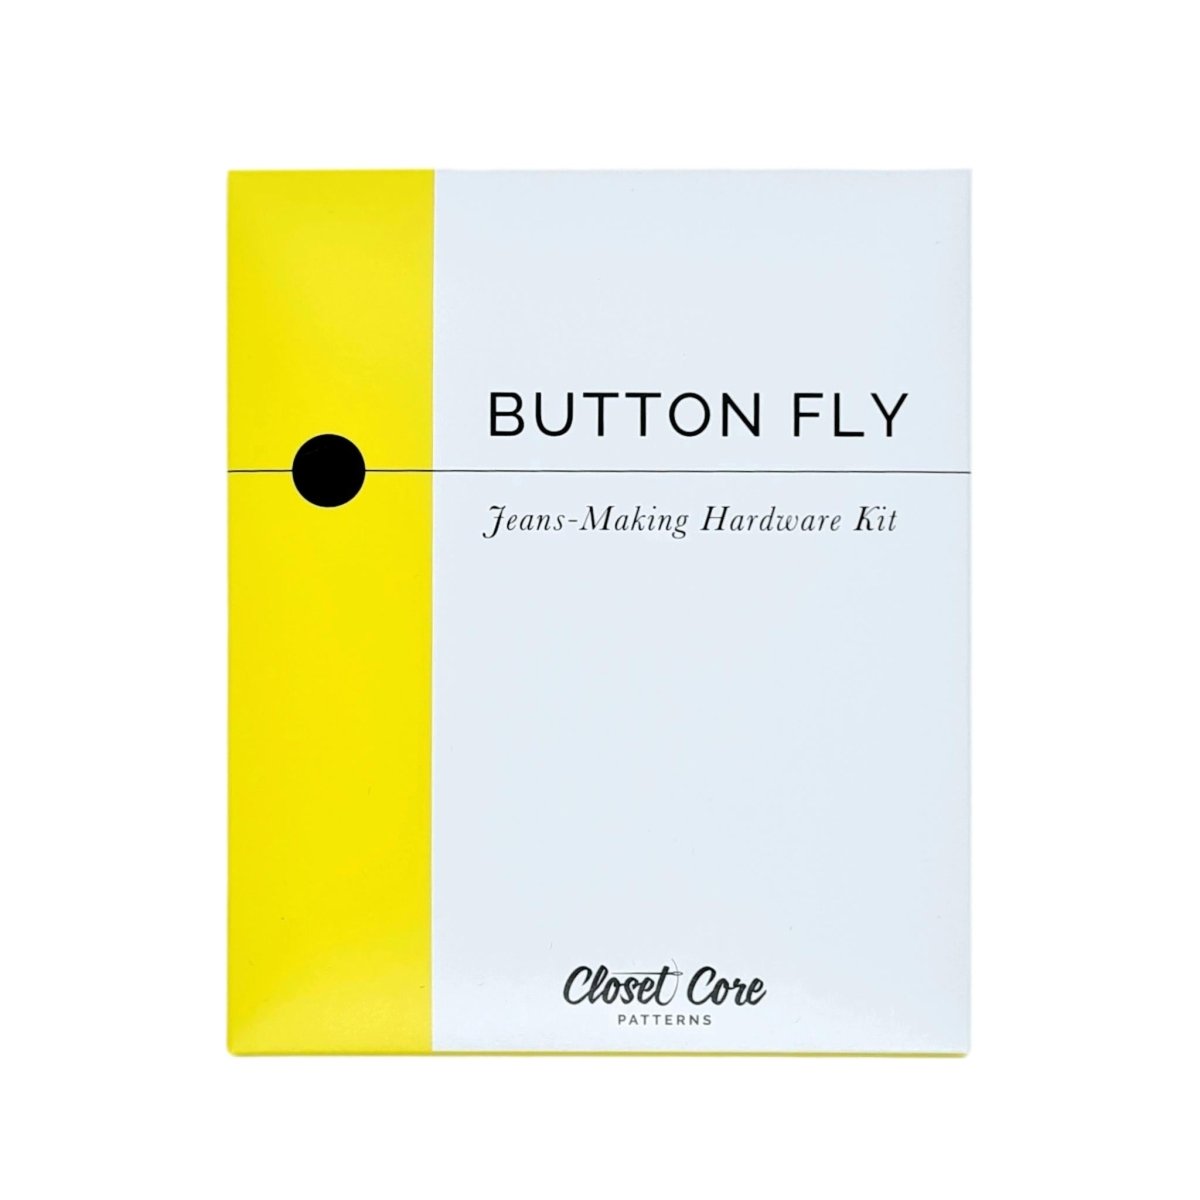 Closet Core - Button Fly Jeans Making Hardware Kit